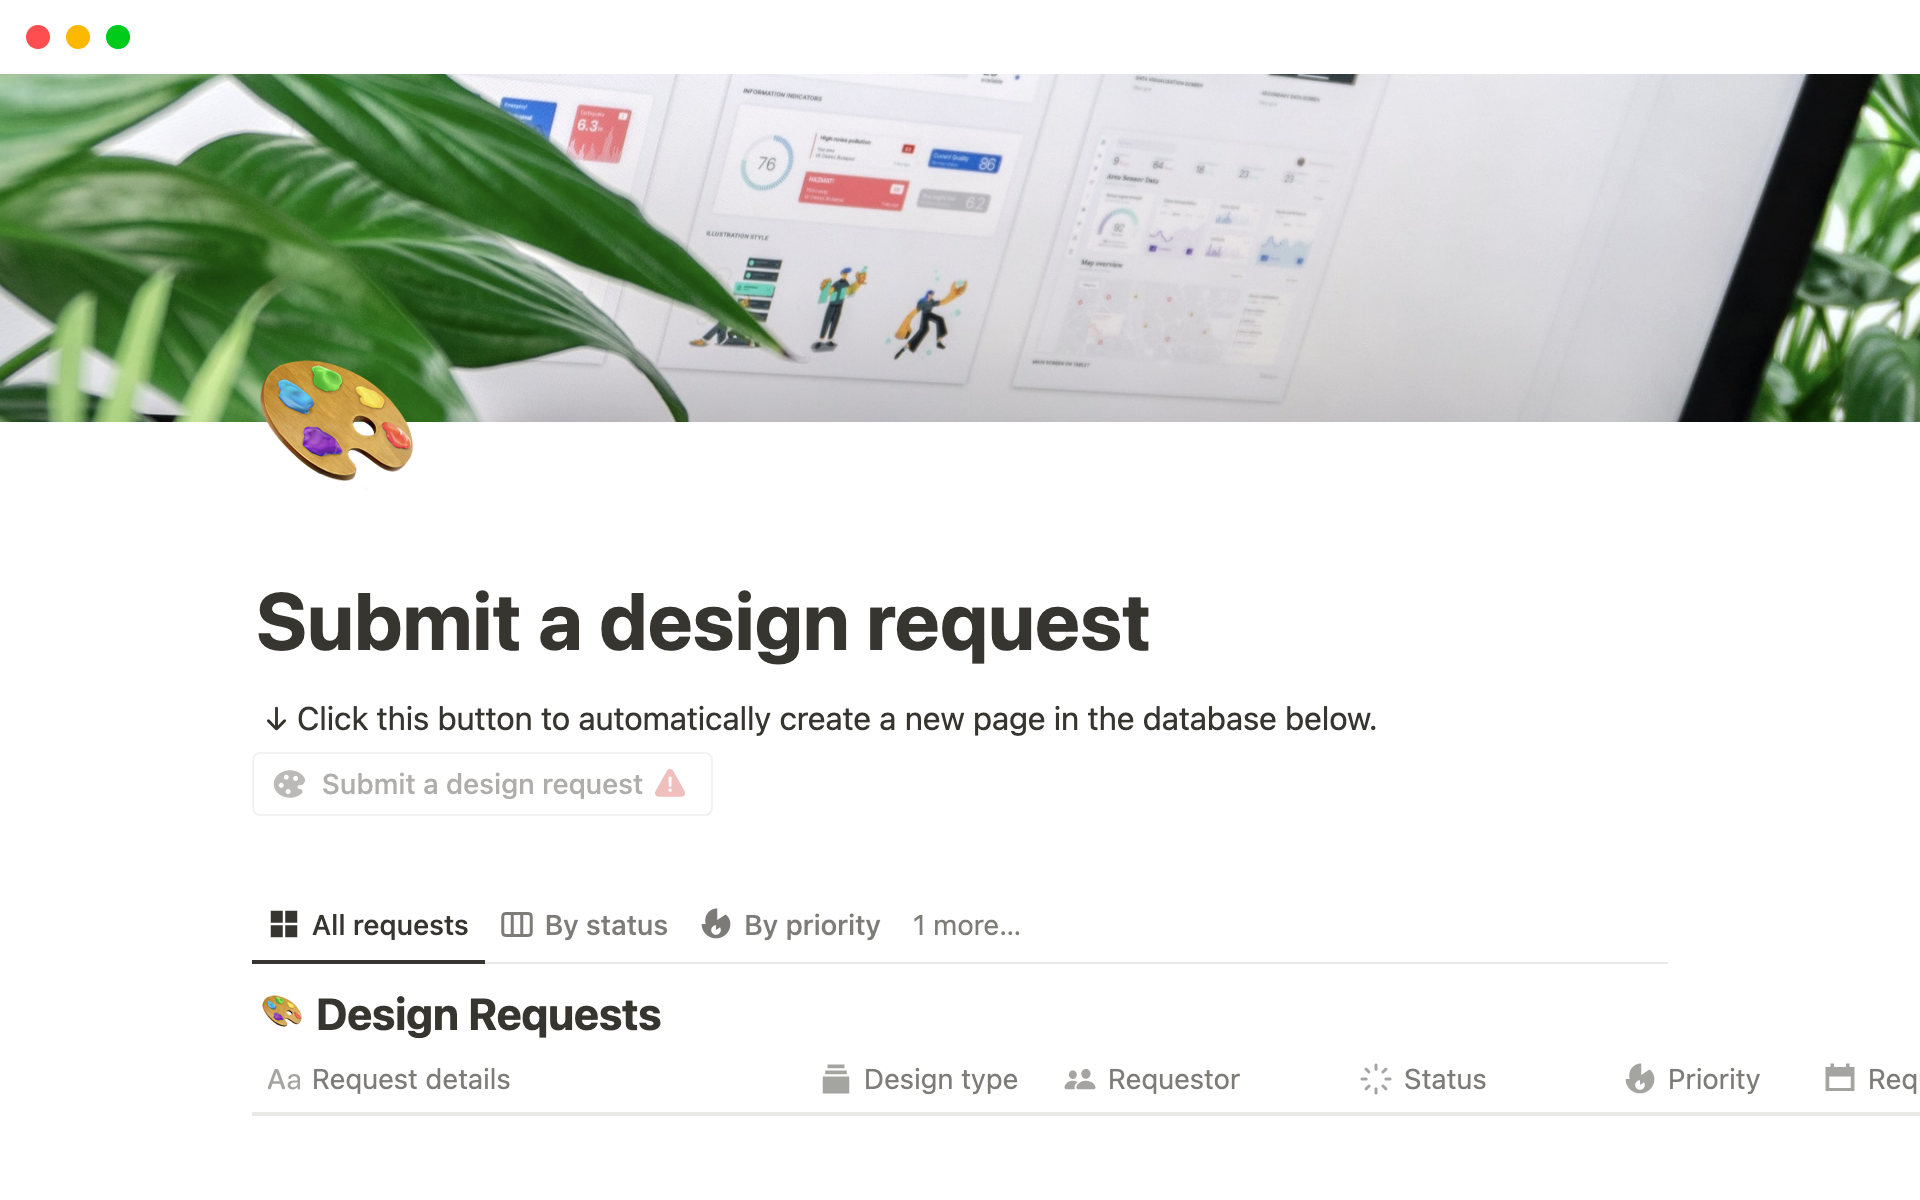 Streamline your design request process with Notion's button feature.